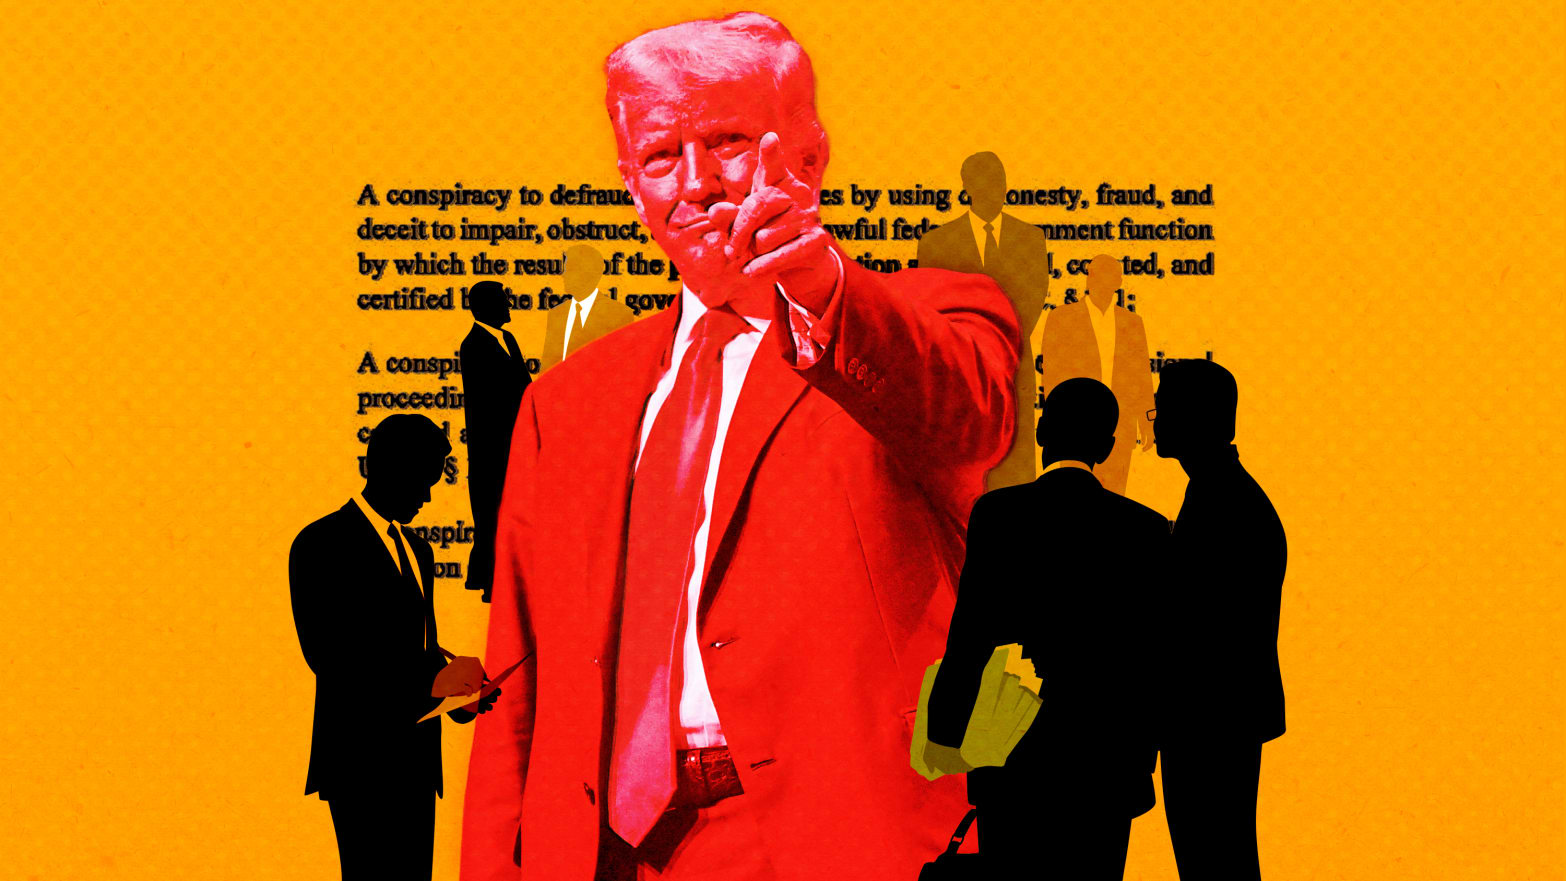 A photo illustration of former President Donald Trump with a background of text from his 2020 election indictment.